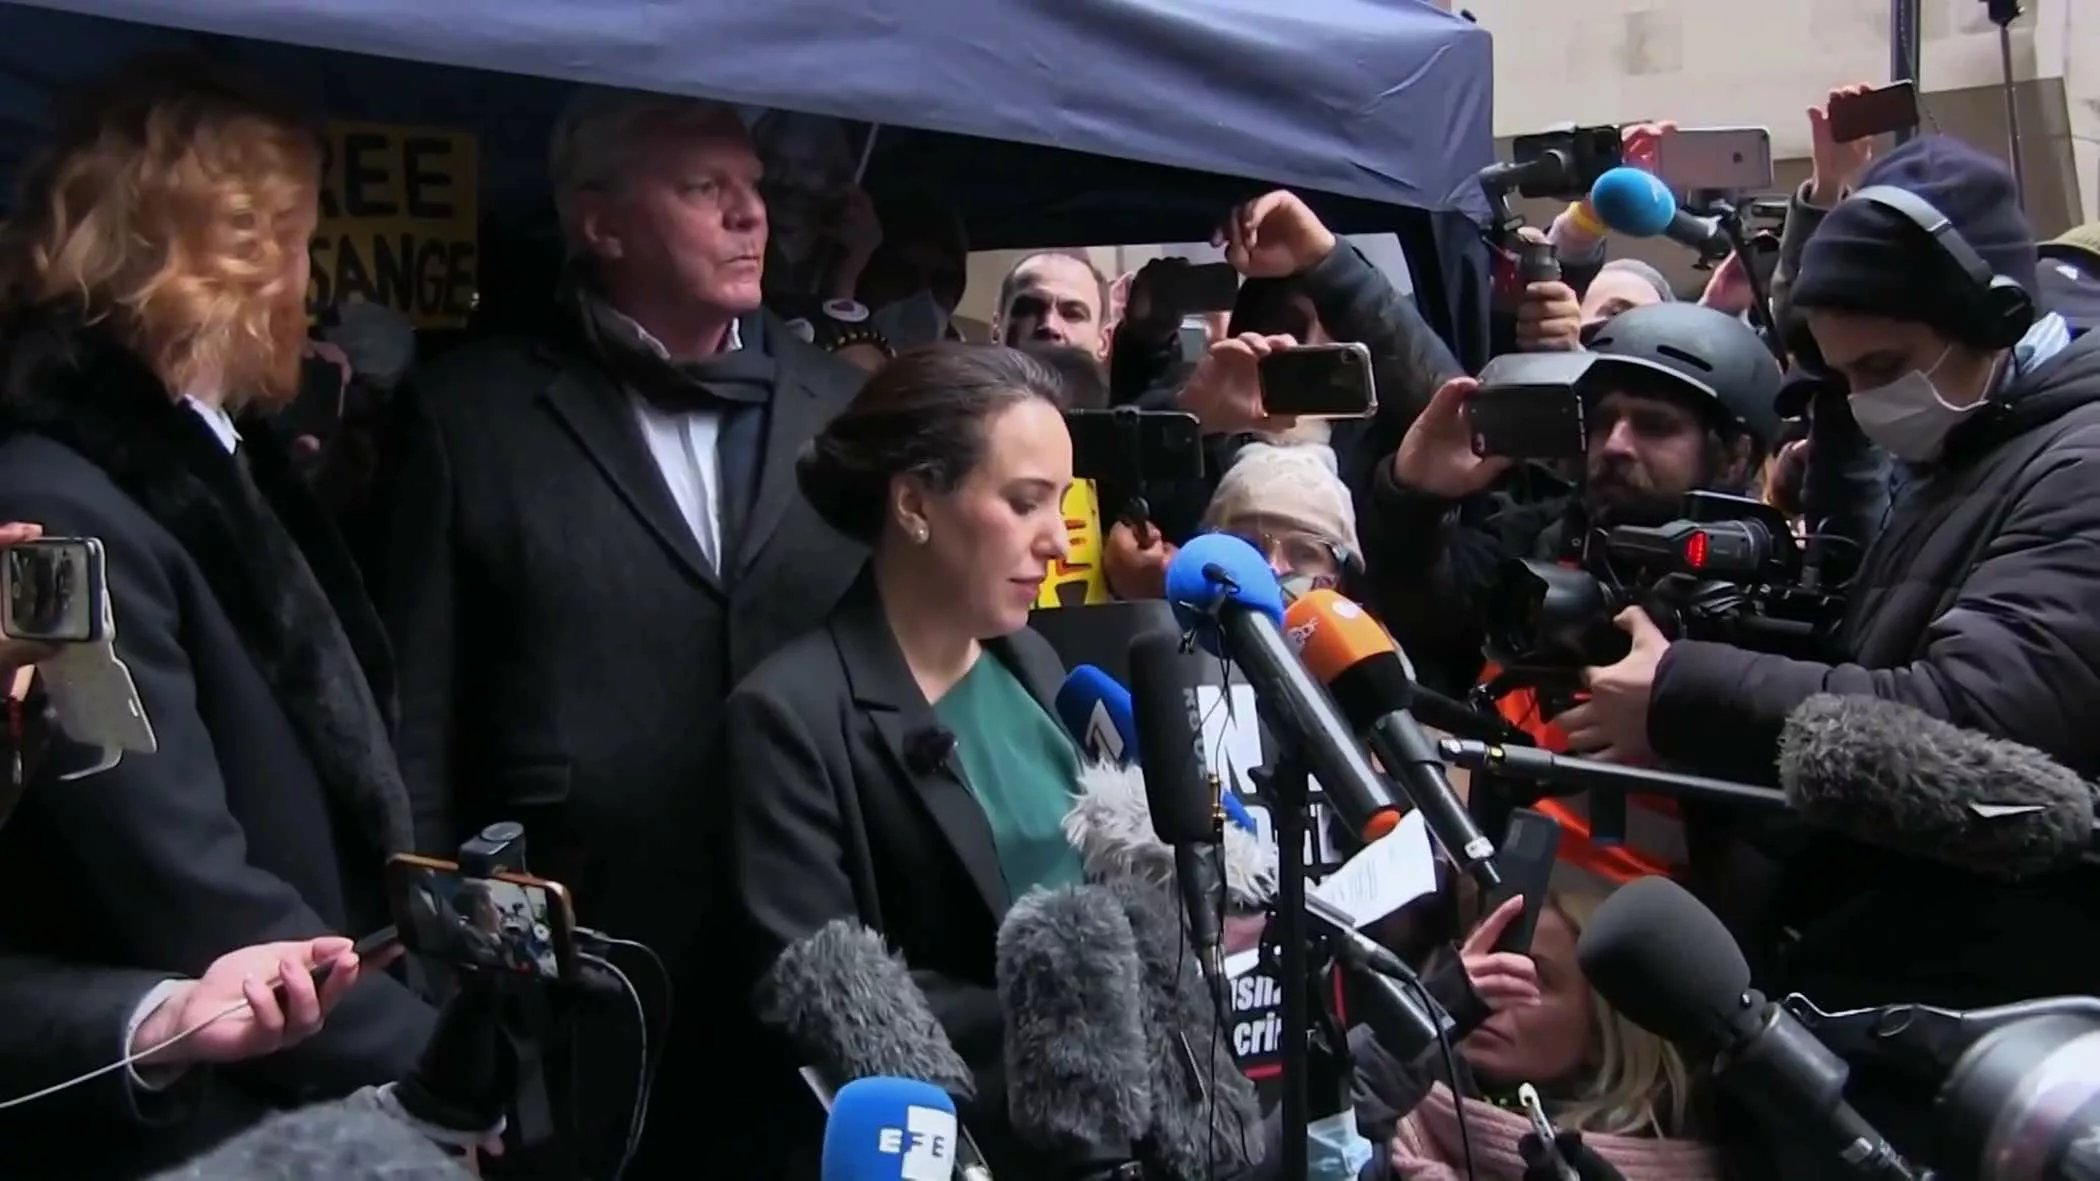 Hundreds of journalists and cameras attacking the spokespeople with microphones for comments on their exit from a tent with Free Julian Assange slogan